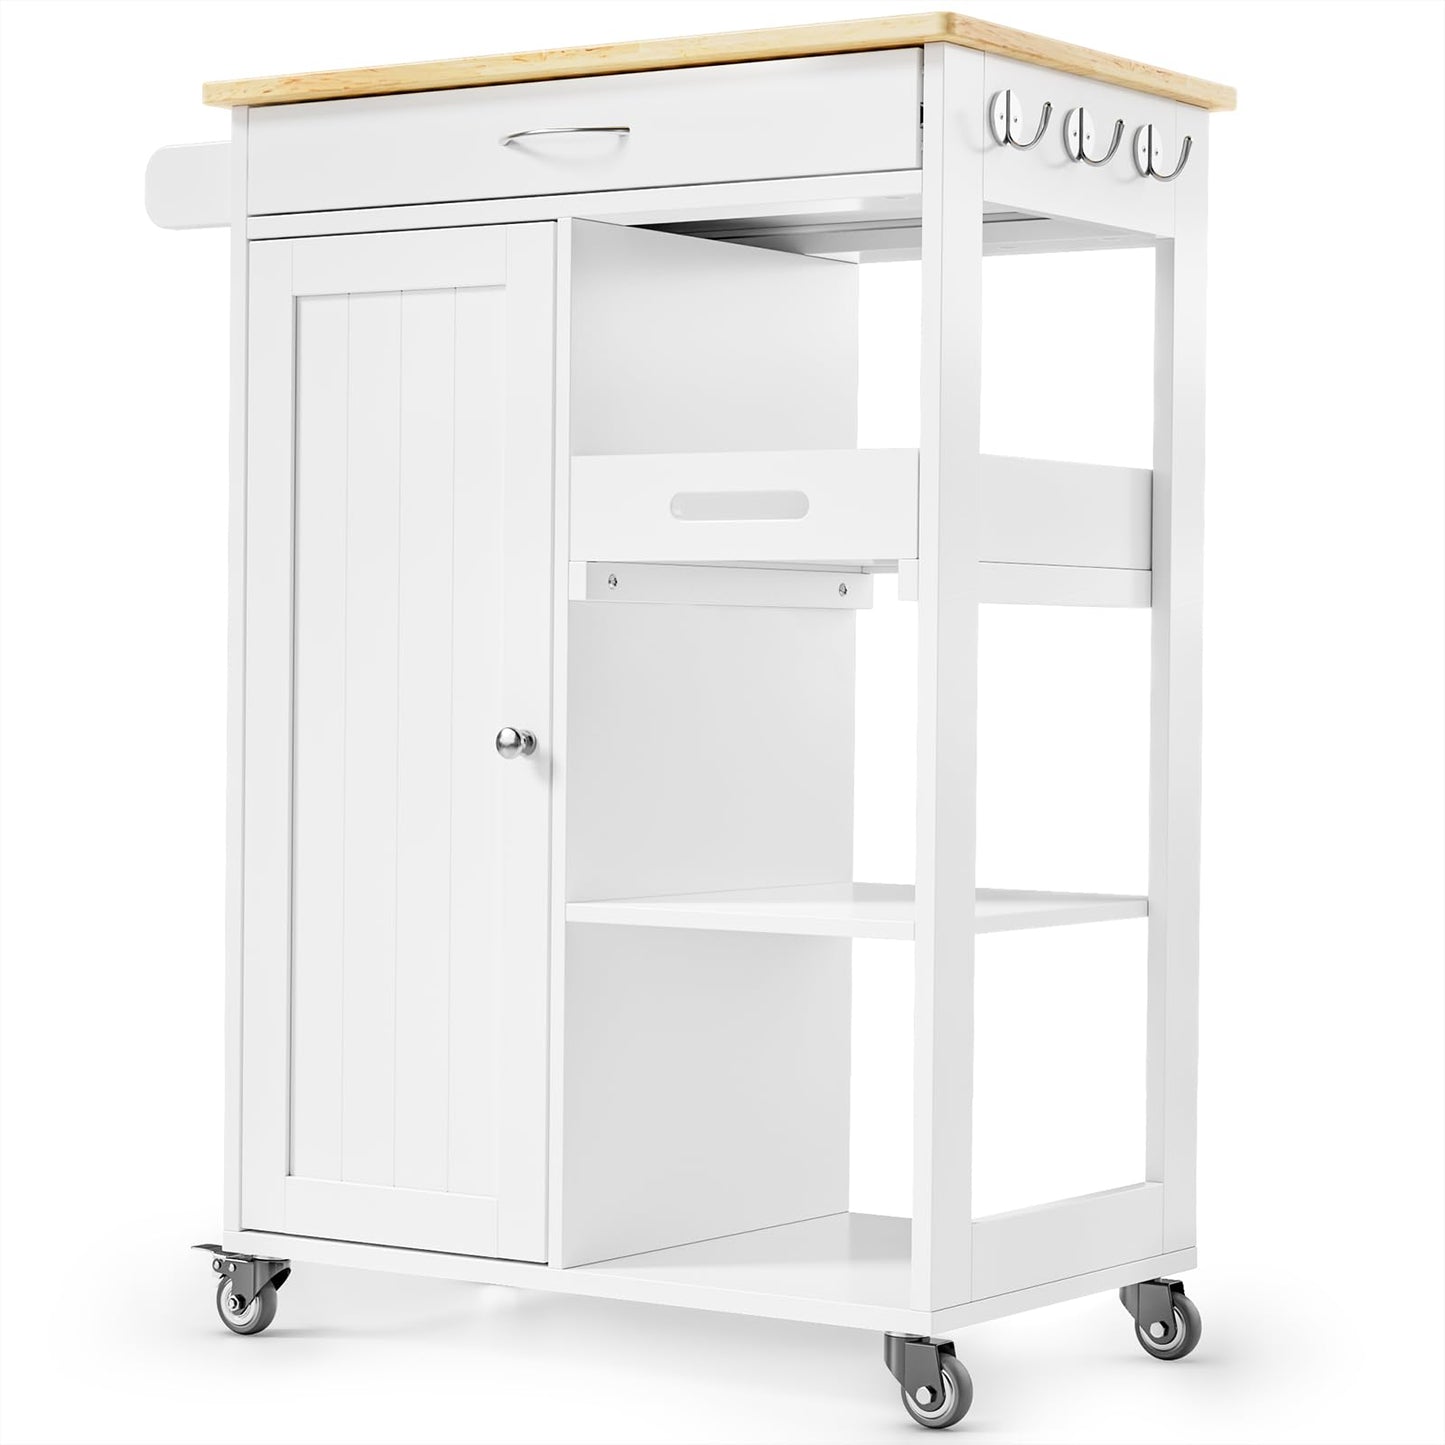 Gizoon Kitchen Island Cart with Removable Tray, 27.6''W Rolling Utility Trolley Cart with Drawer, Cabinet, Towel Rack, Hooks and 3 Open Storage